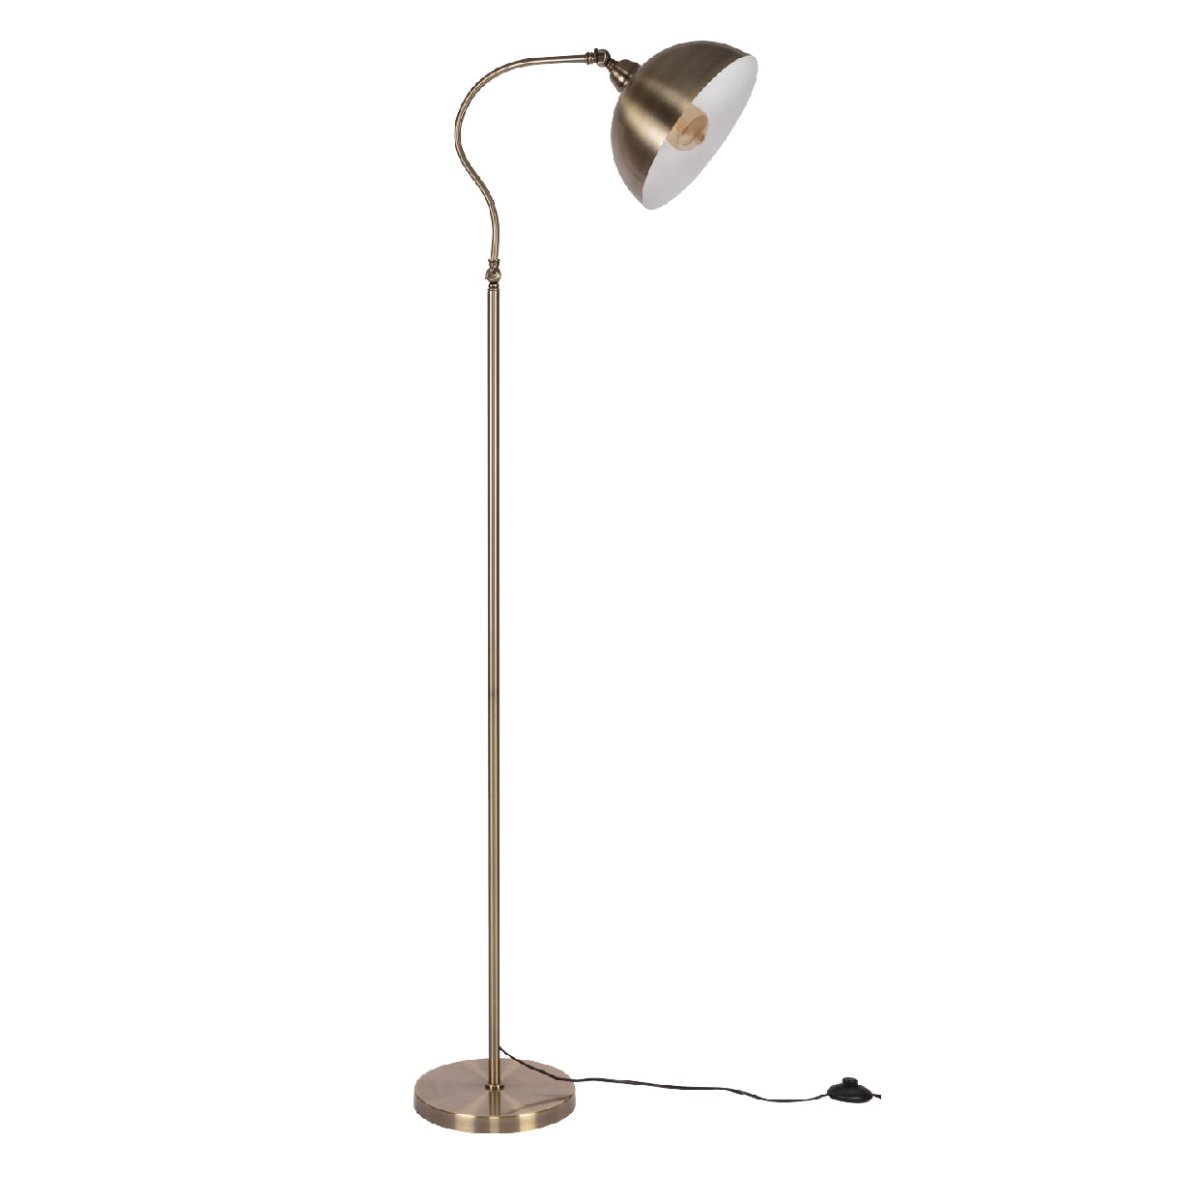 Main image of Antique Brass Metal Dome Shade Floor Lamp with E27 Fitting | TEKLED 151-19562